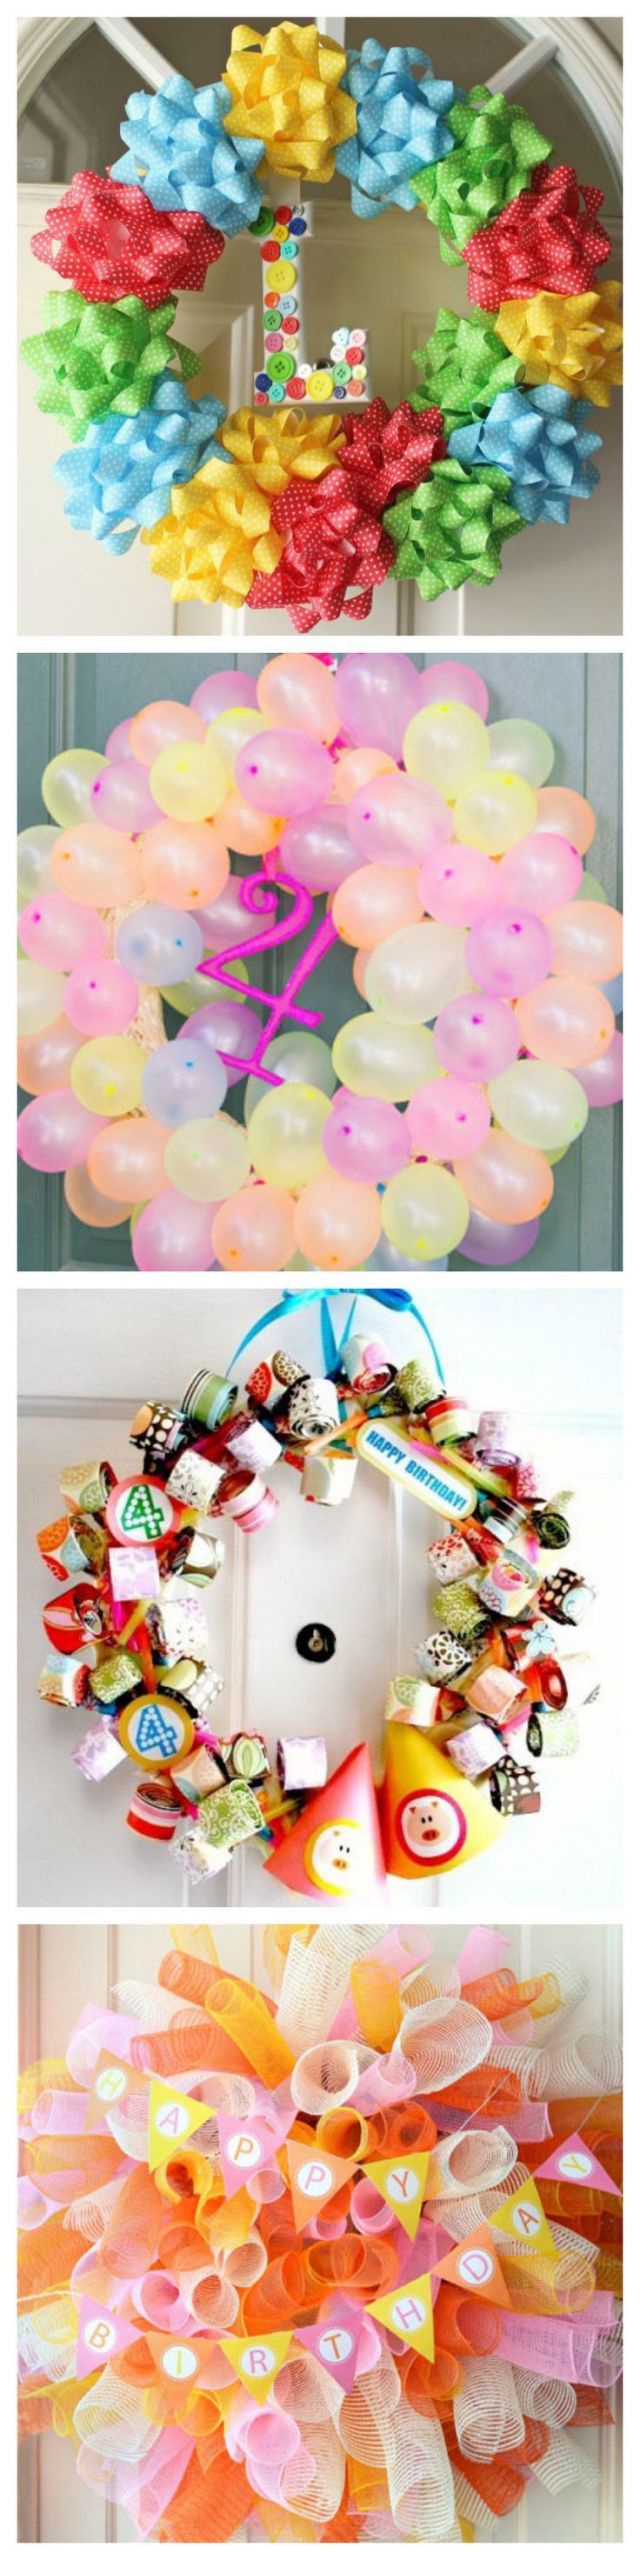 Homemade Birthday Decorations
 9 Birthday Wreaths That Are Just Too Cute